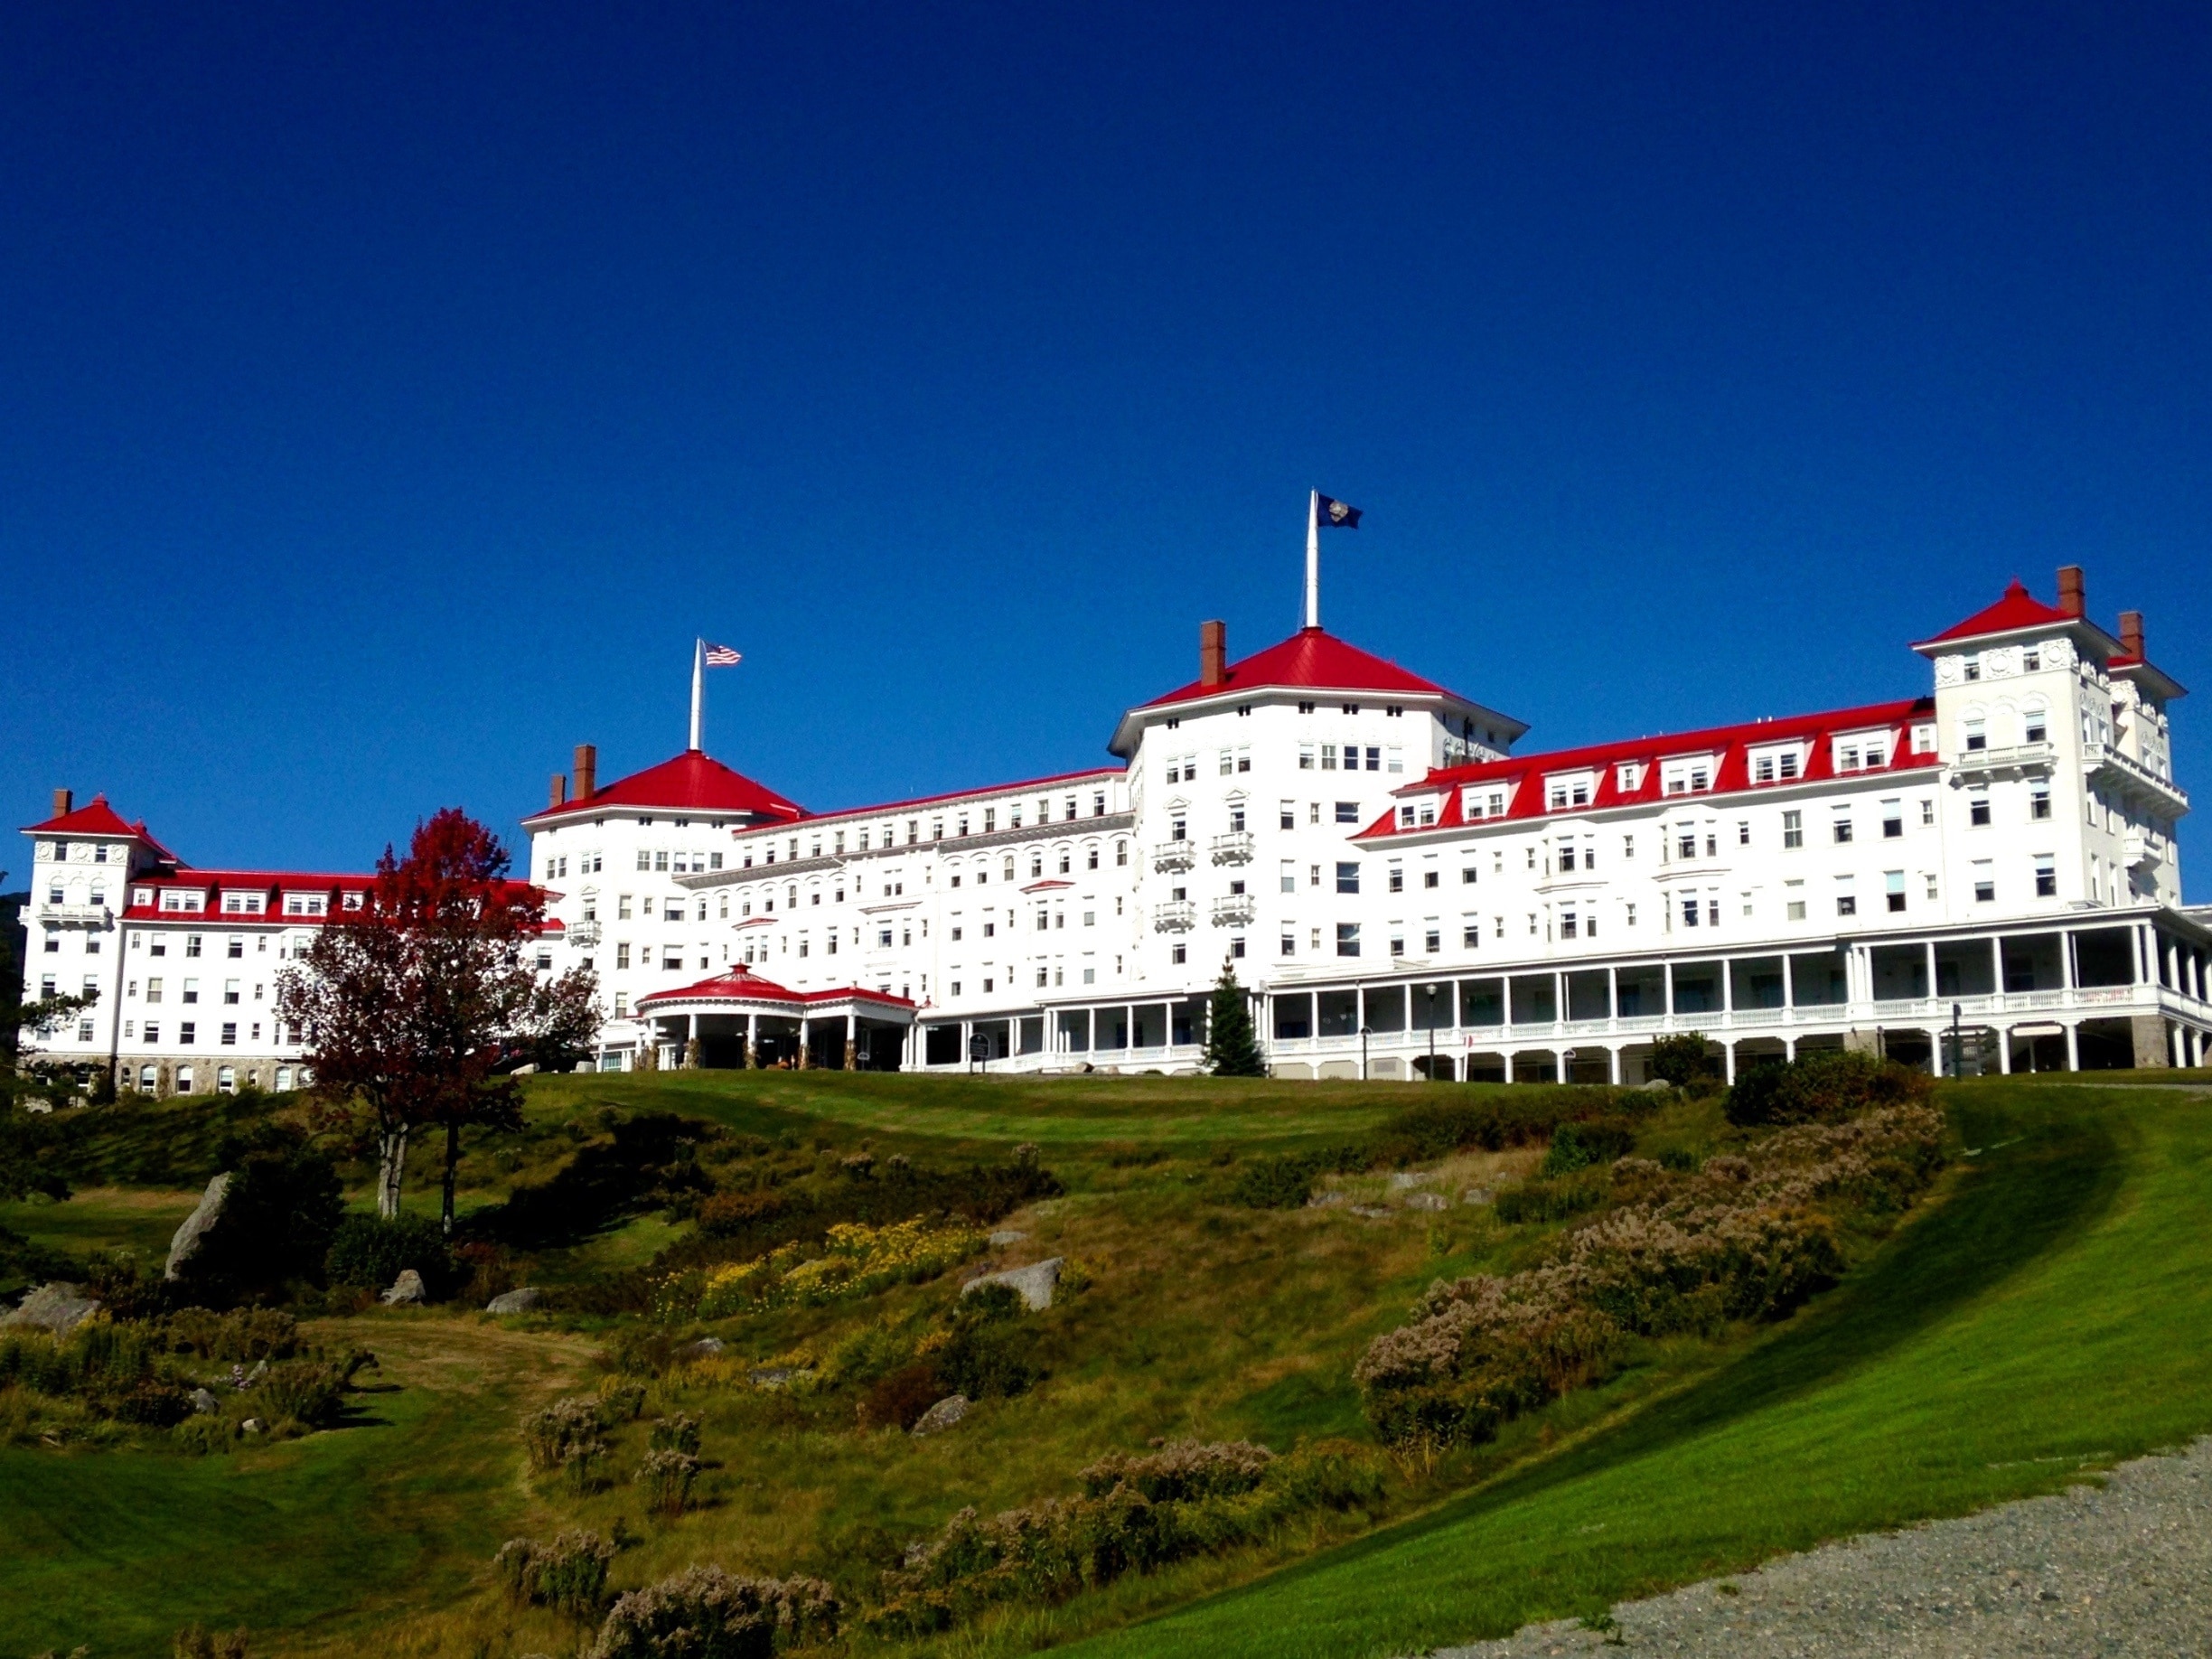 The Mount Washington Hotel is a hotel in Bretton Woods, New Hampshire, near Mount Washington. It was designed by Charles Alling Gifford.

The hotel was constructed between 1900 and 1902 by Joseph Stickney, a native of Concord, New Hampshire who had made a fortune before the age of 30 as a coal broker in Pennsylvania.